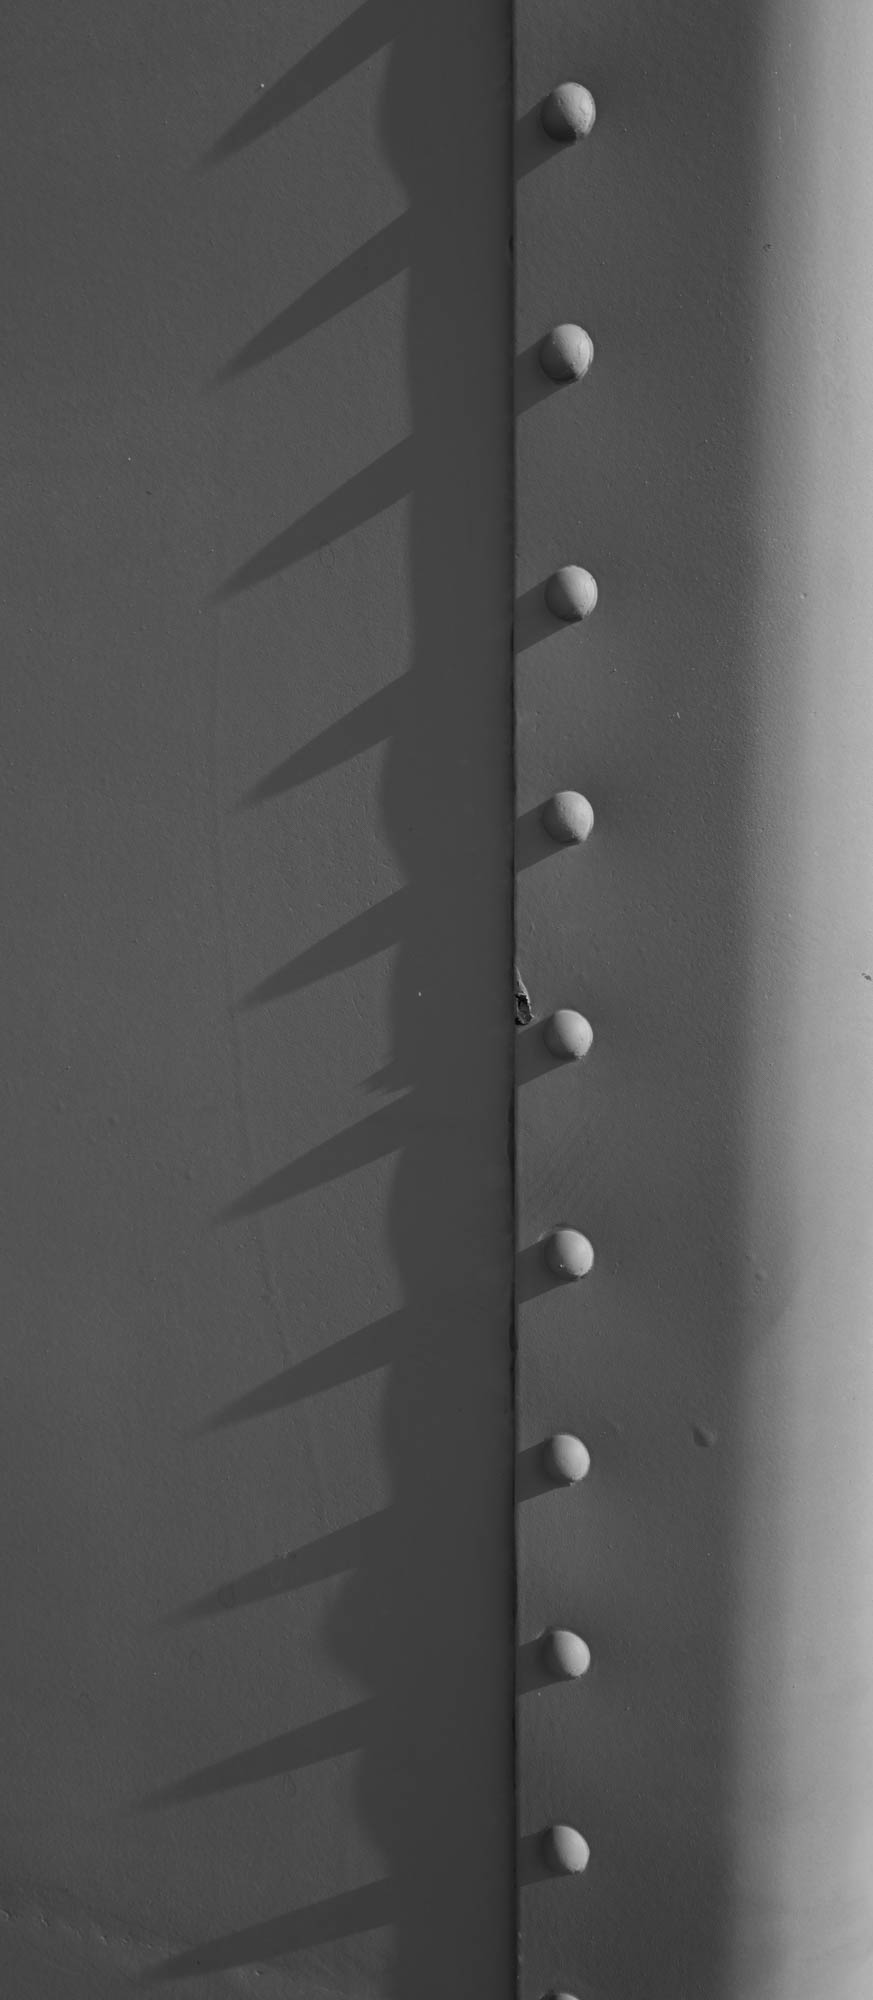 Row of rivets with shadows.